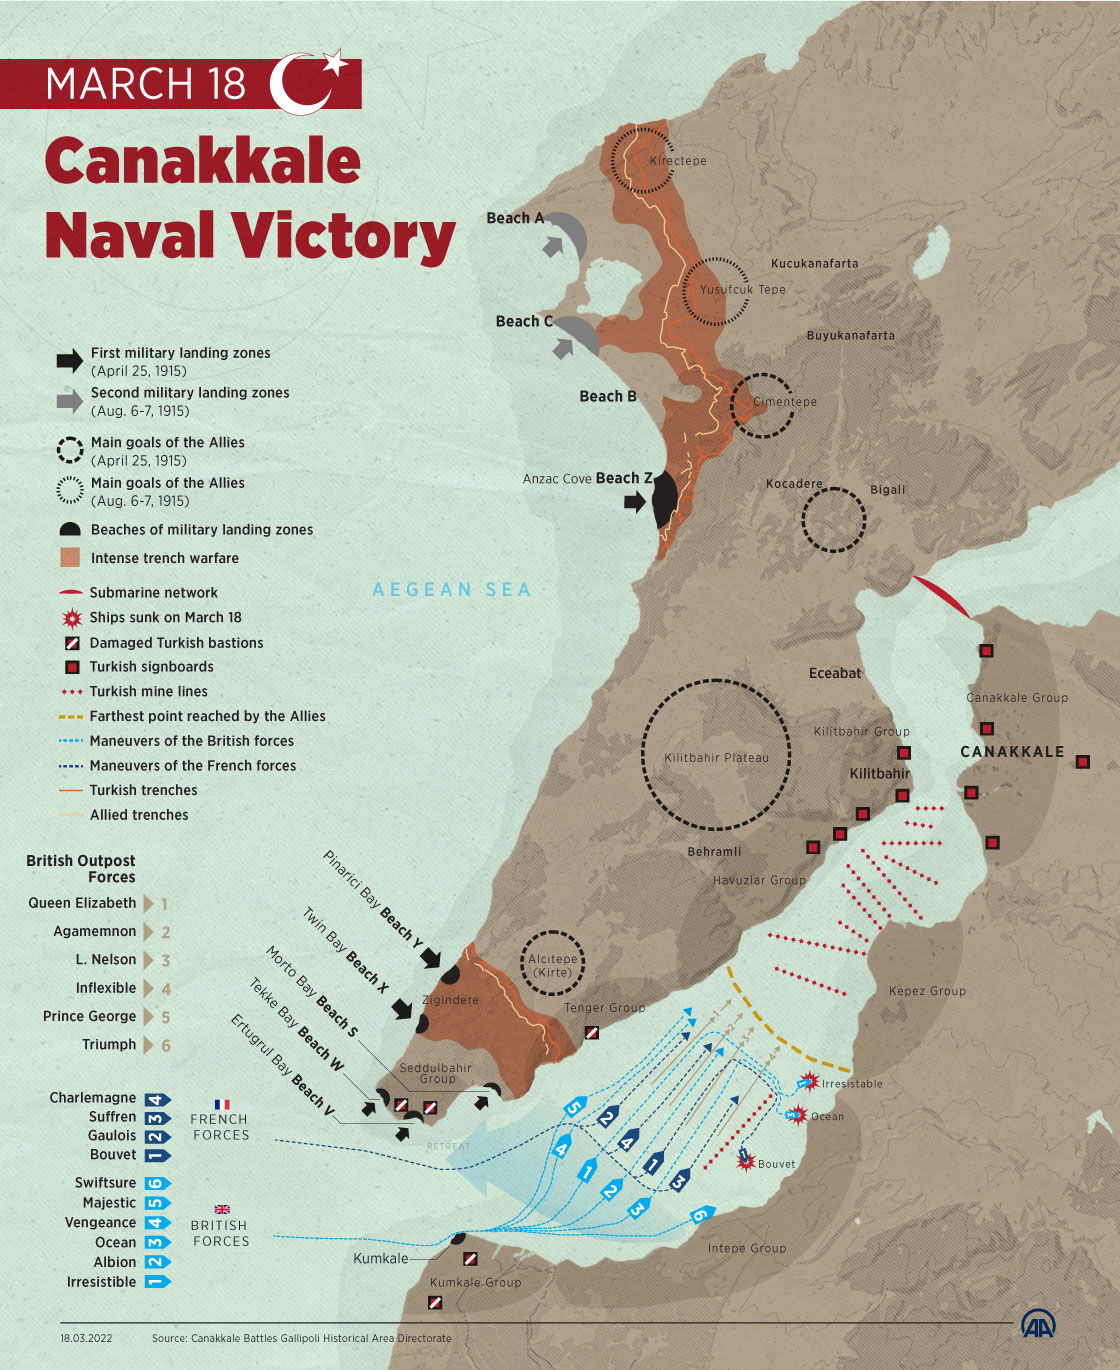 March 18 Canakkale Naval Victory